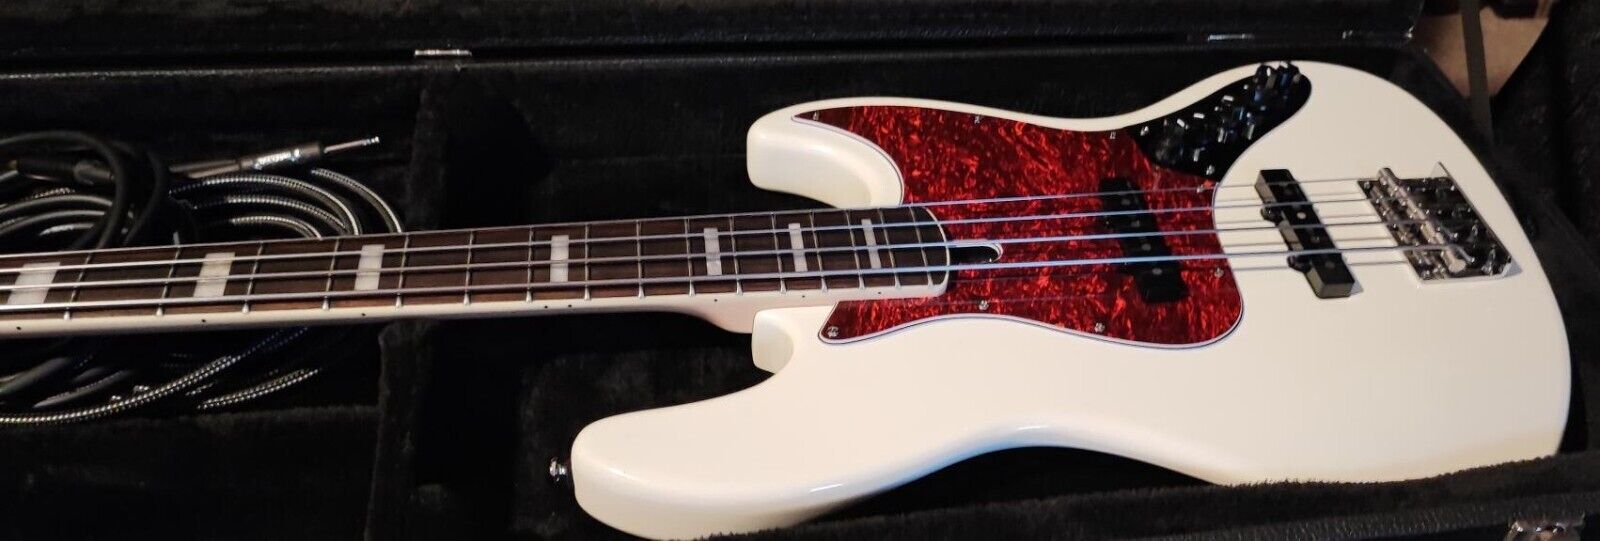 New 2023 Antique White "SIRE MARCUS MILLER V7 ACTIVE" Jazz Bass w/Hardshell Case "SIRE MARCUS MILLER" "SIRE MARCUS MILLER JAZZ BASS - фотография #3